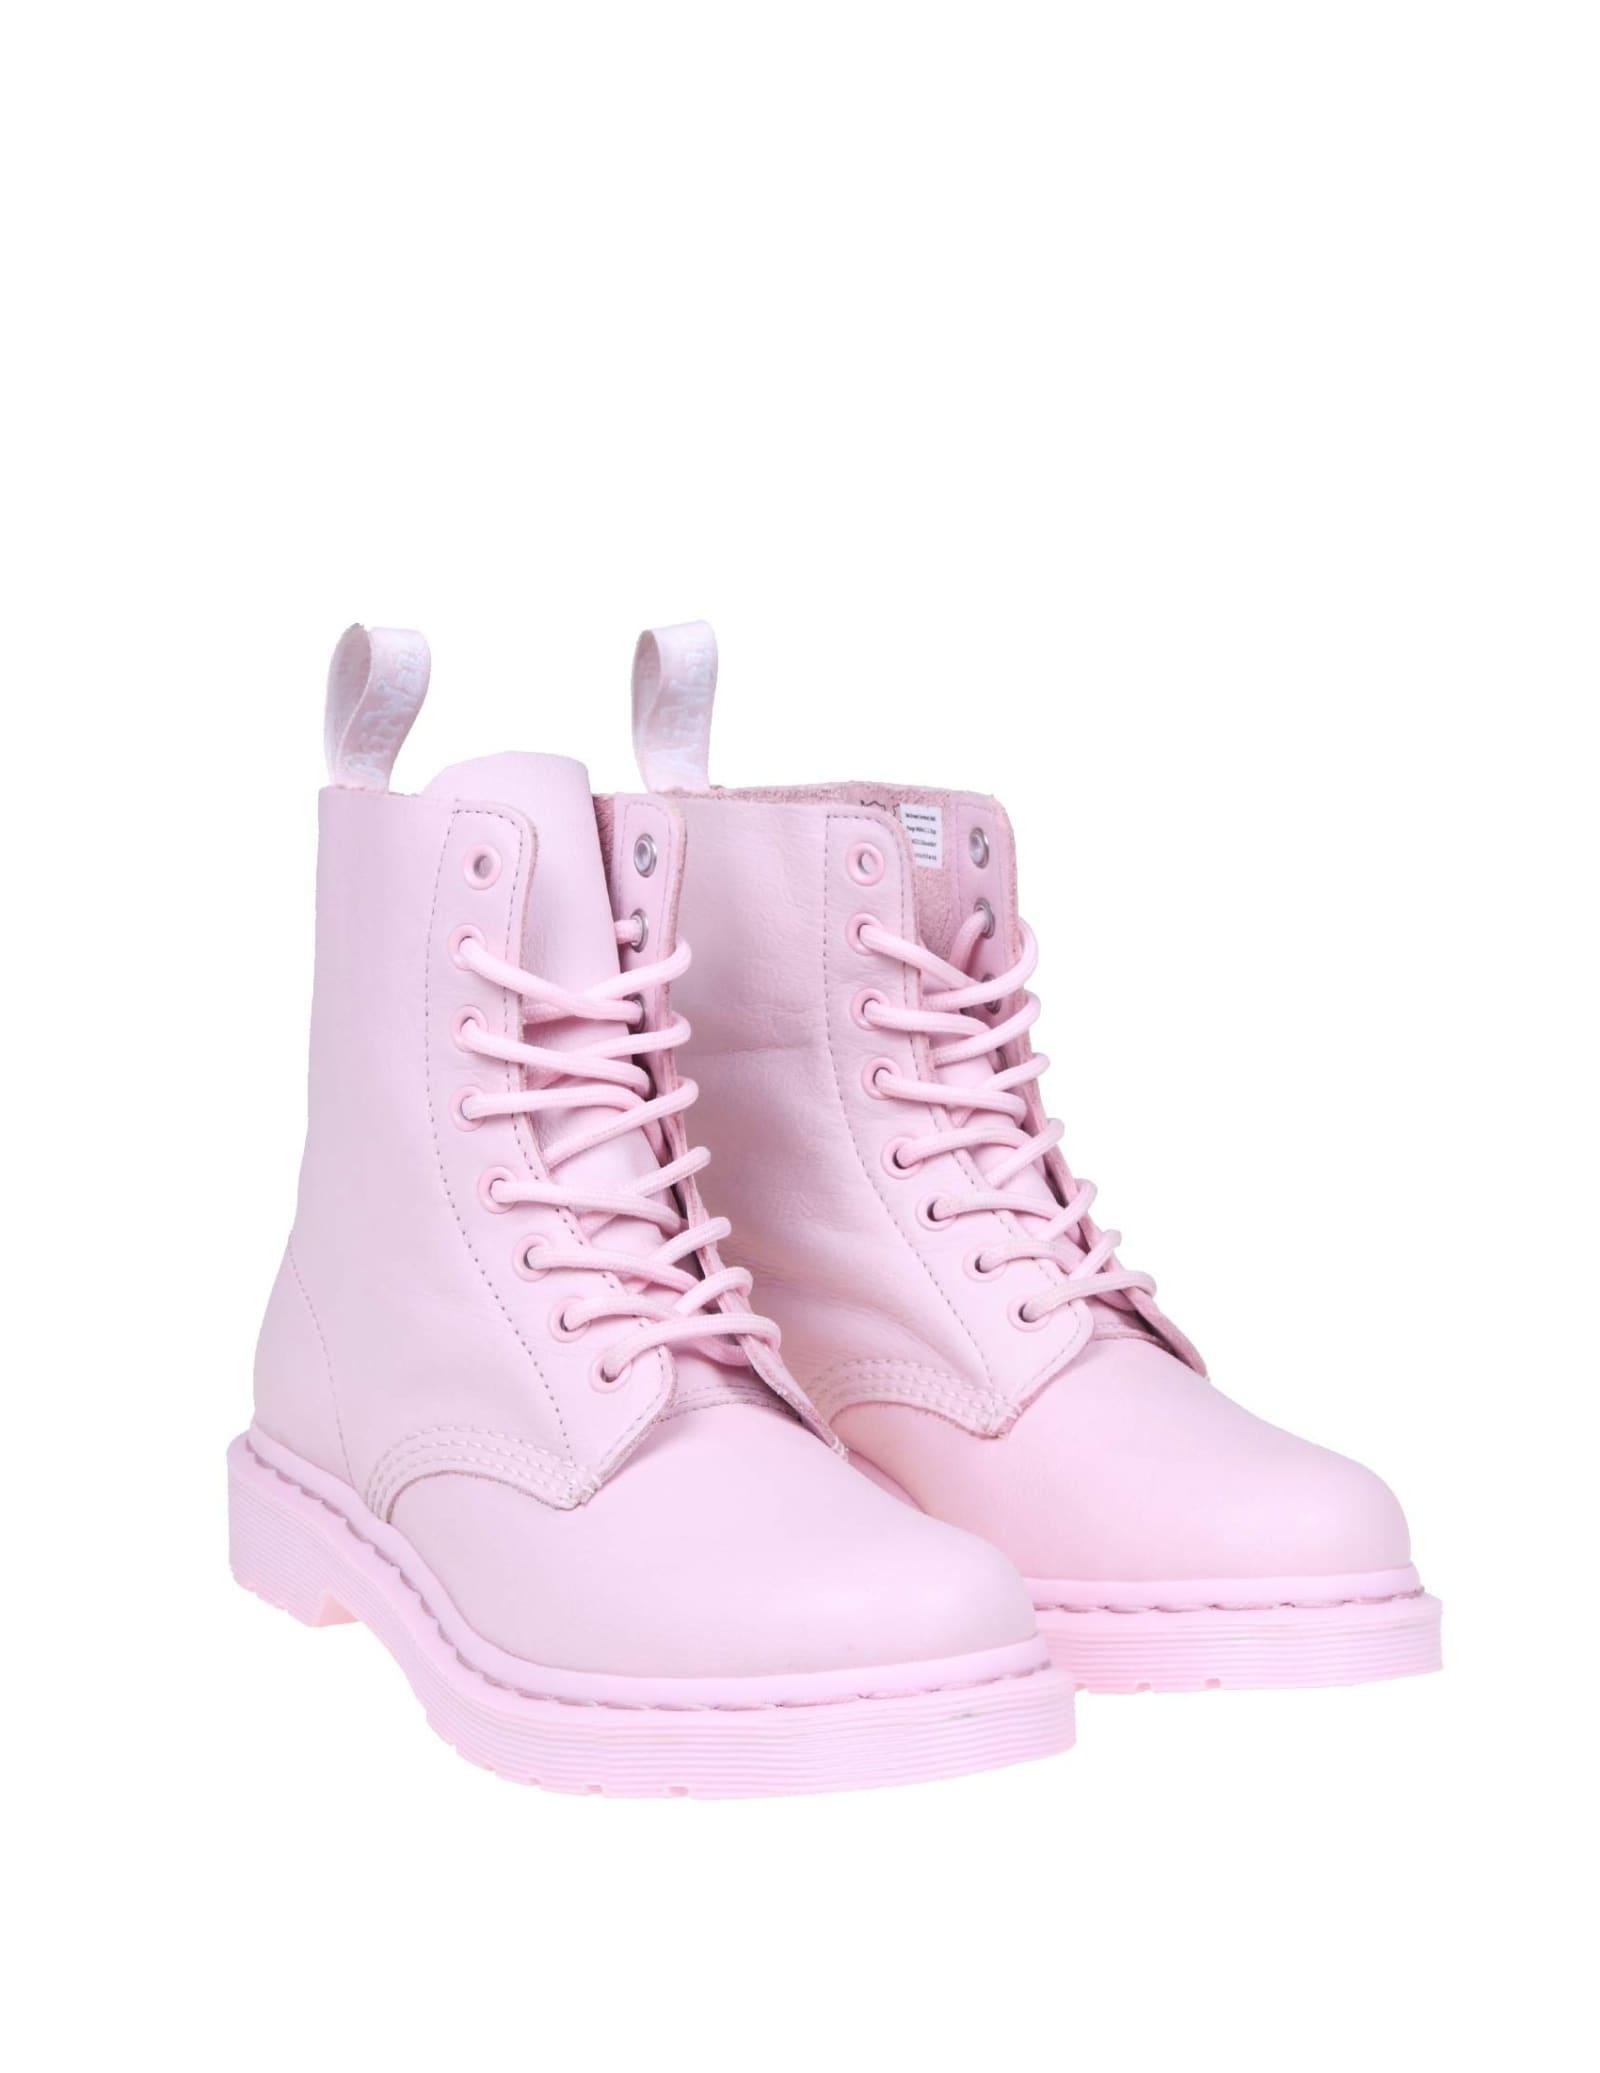 Dr. Martens 1460 Pascal Mono In Leather in Pink | Lyst